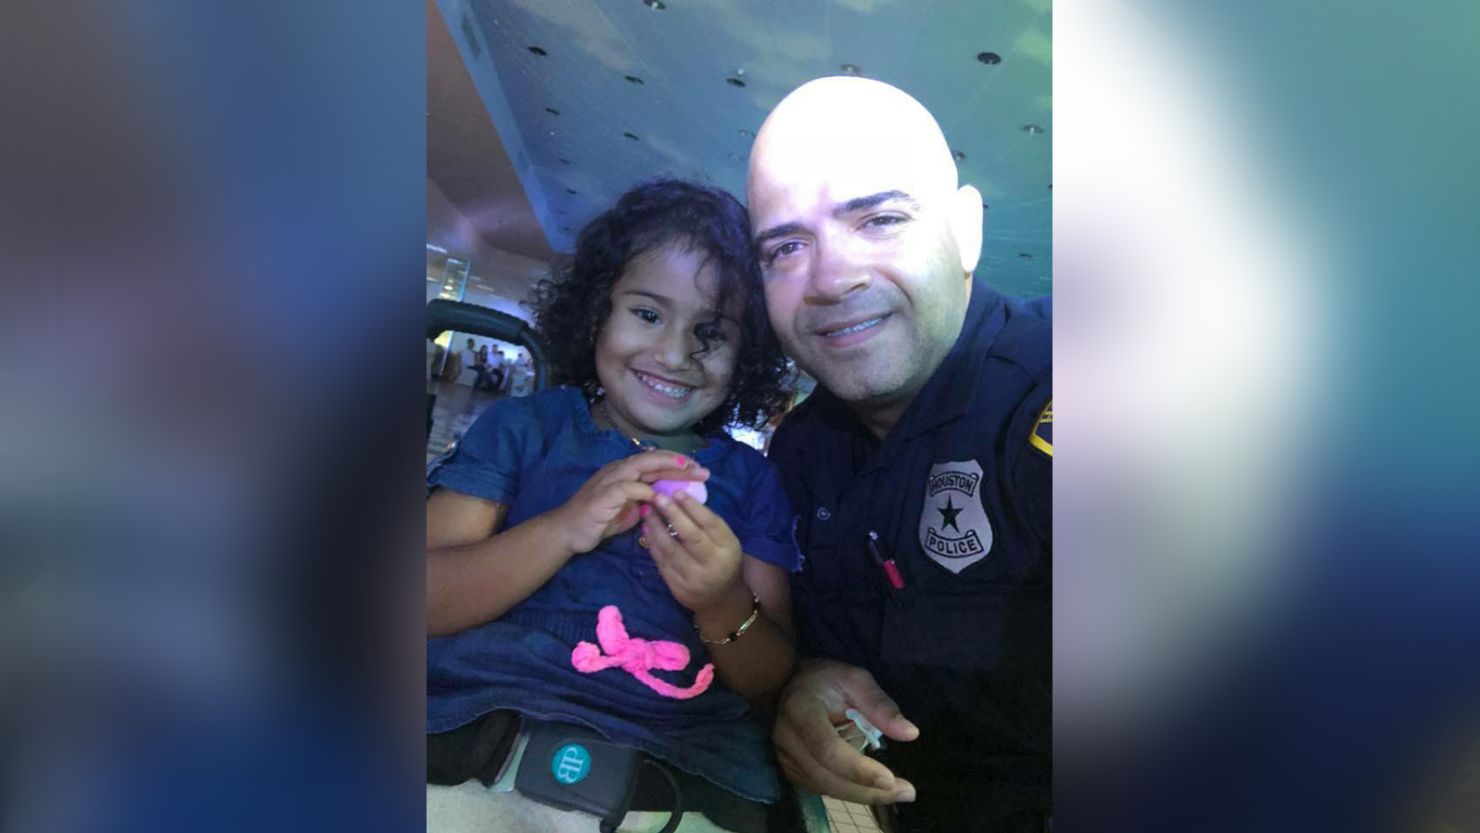 Houston Police Officer Sandy Fernandez with his young dance partner.